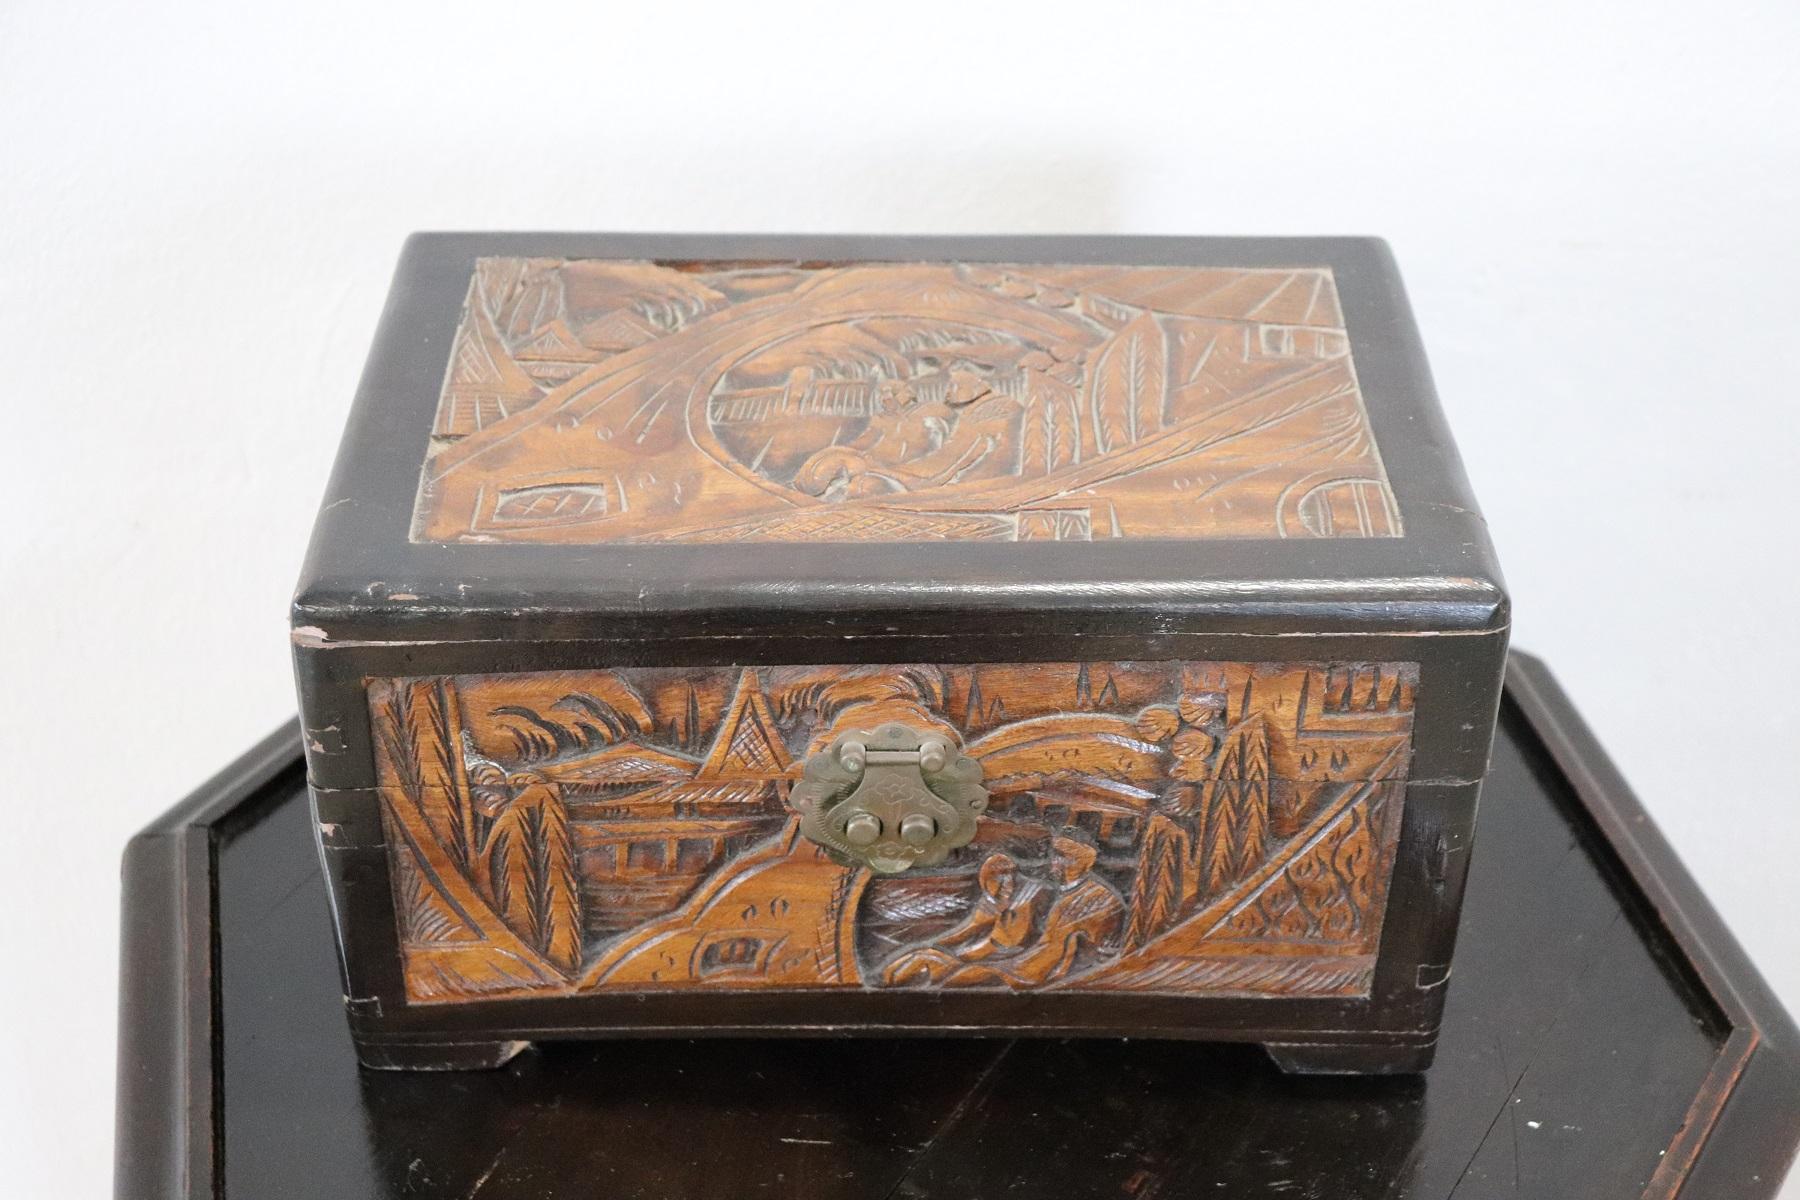 Rare and fine quality 20th century Japanese carved walnut jewelry box. The carved decoration is very refined with landscapes and figures covers every side. Internally you can keep your jewels. Used condition. Small signs of wear the key is